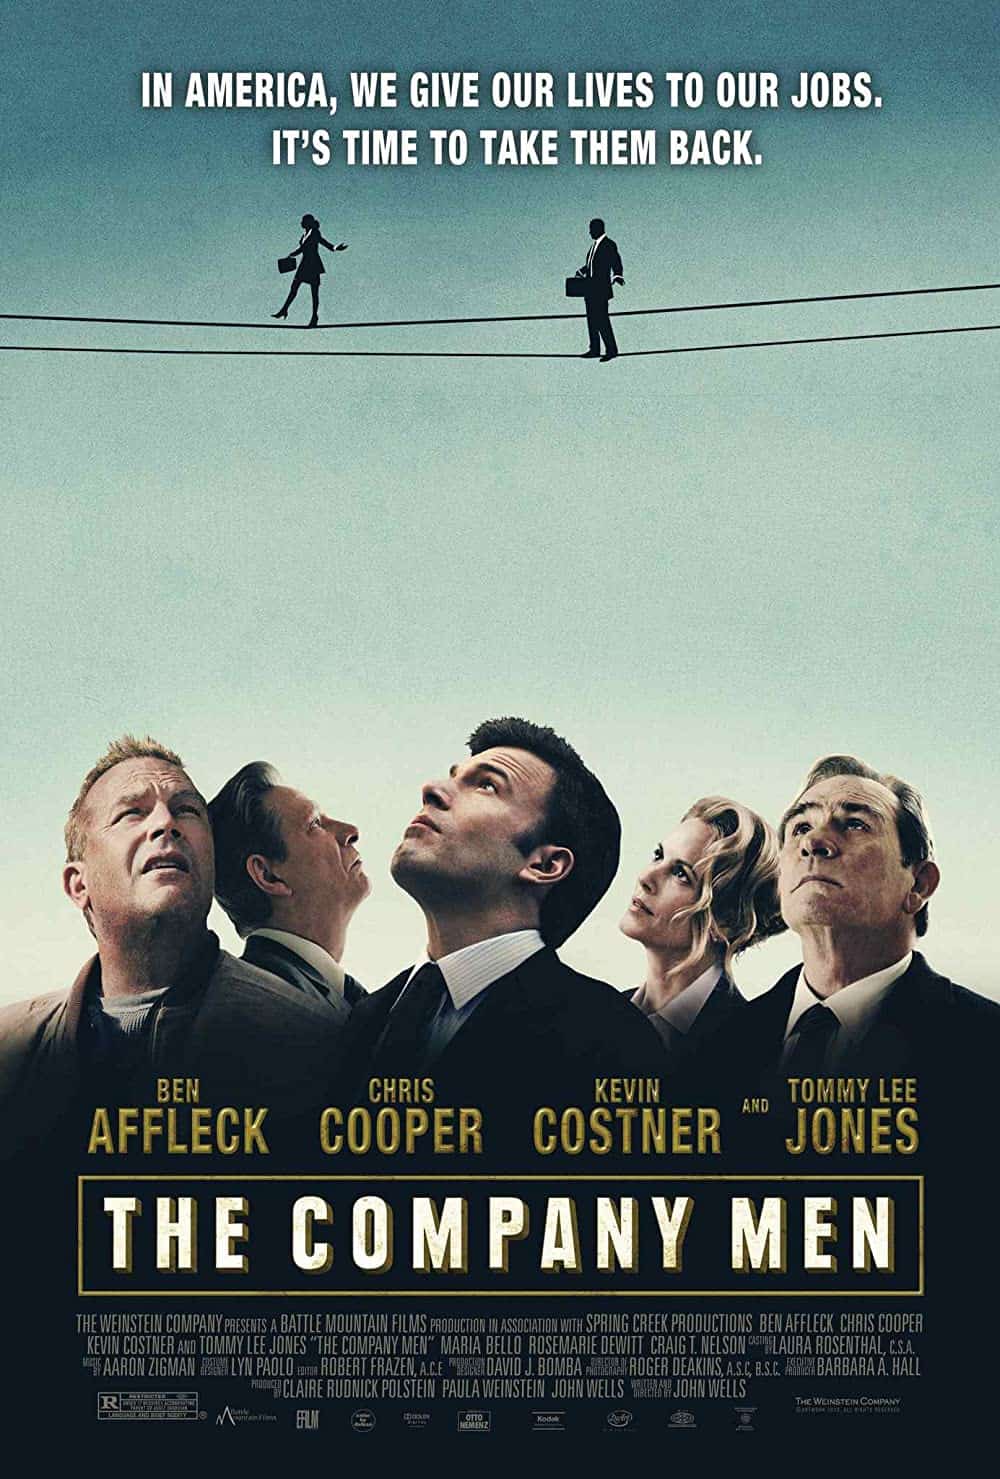 The Company Men (2010) Best Ben Affleck Movies of All Time